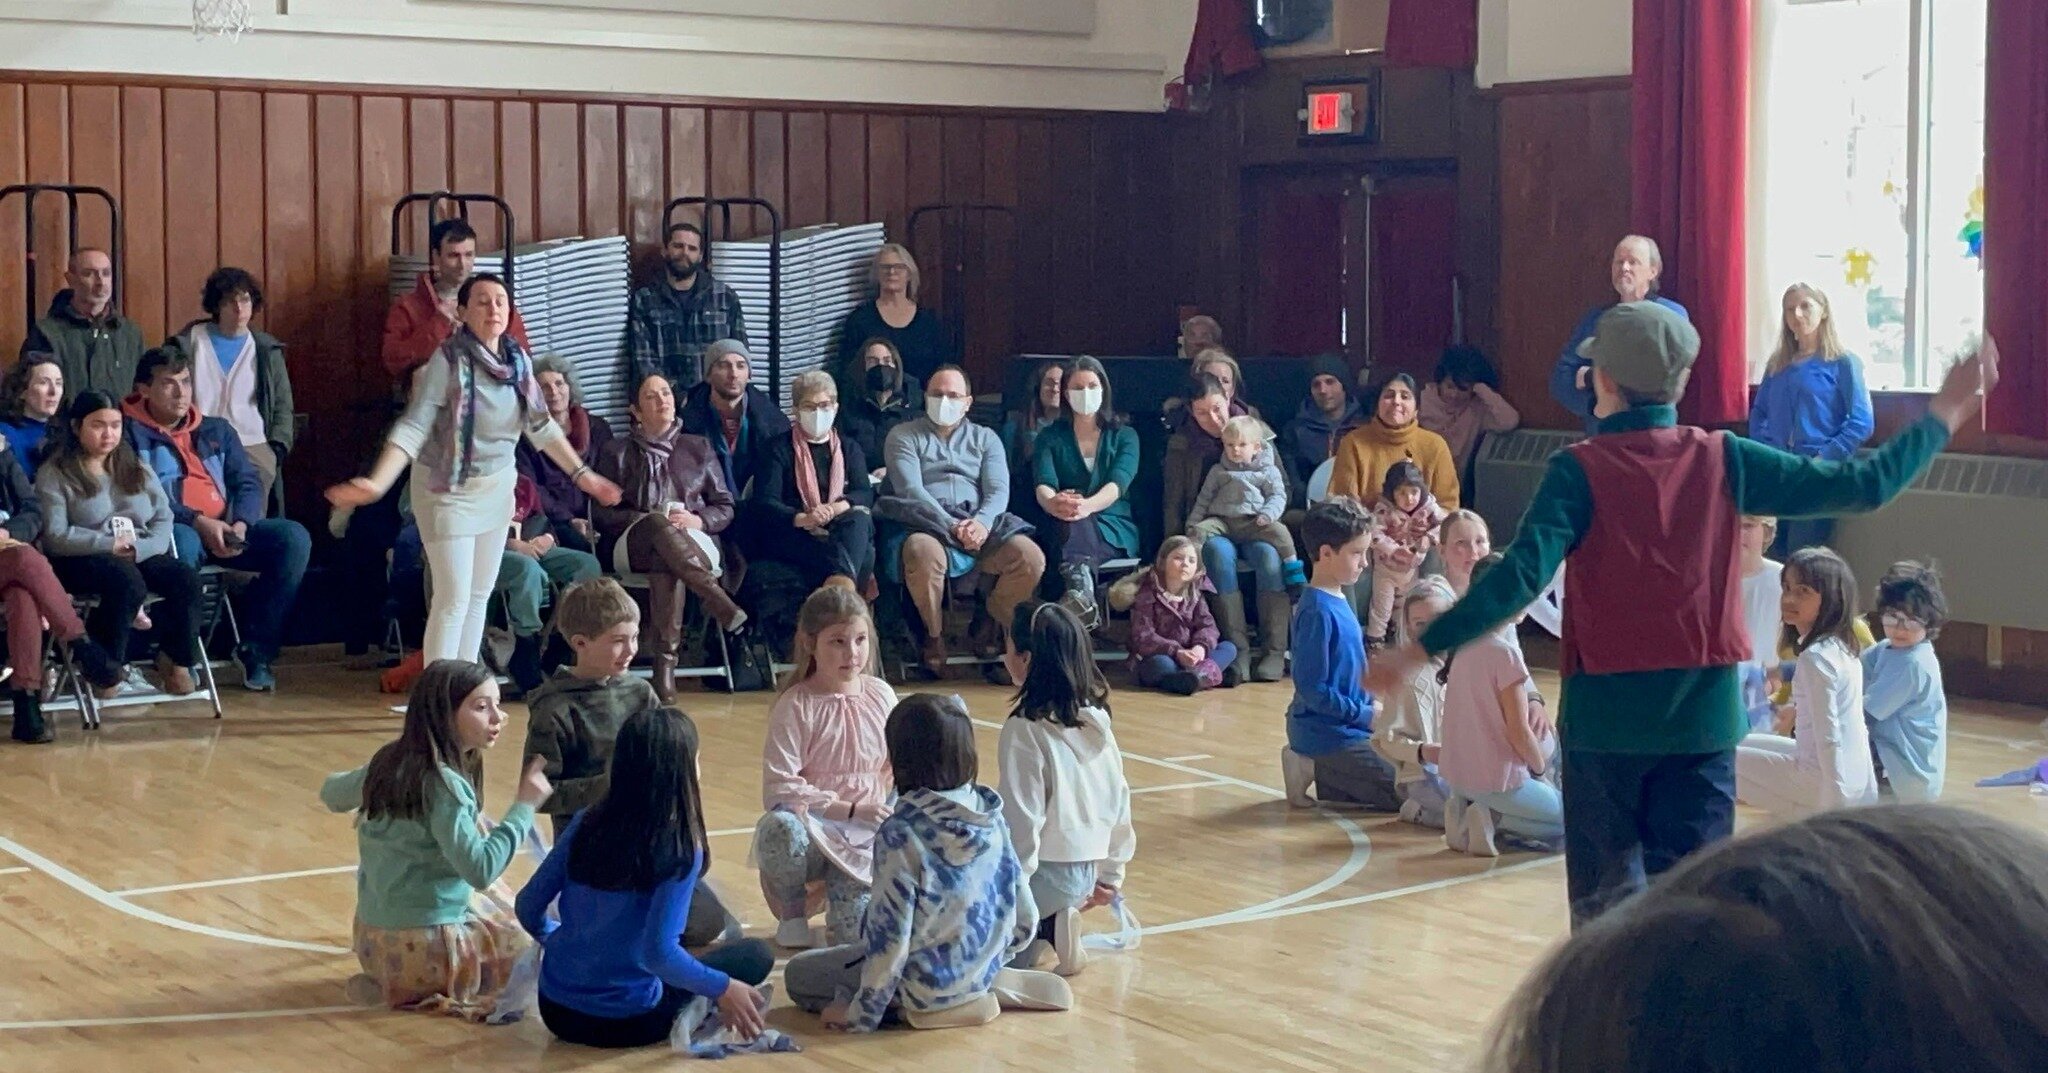 Students in grades 1-5 recently shared their Eurythmy play &quot;King Winter&quot; with the community. The goal of this performance was for students and families to see how the children are working to feel/sense themselves, and each other, working at